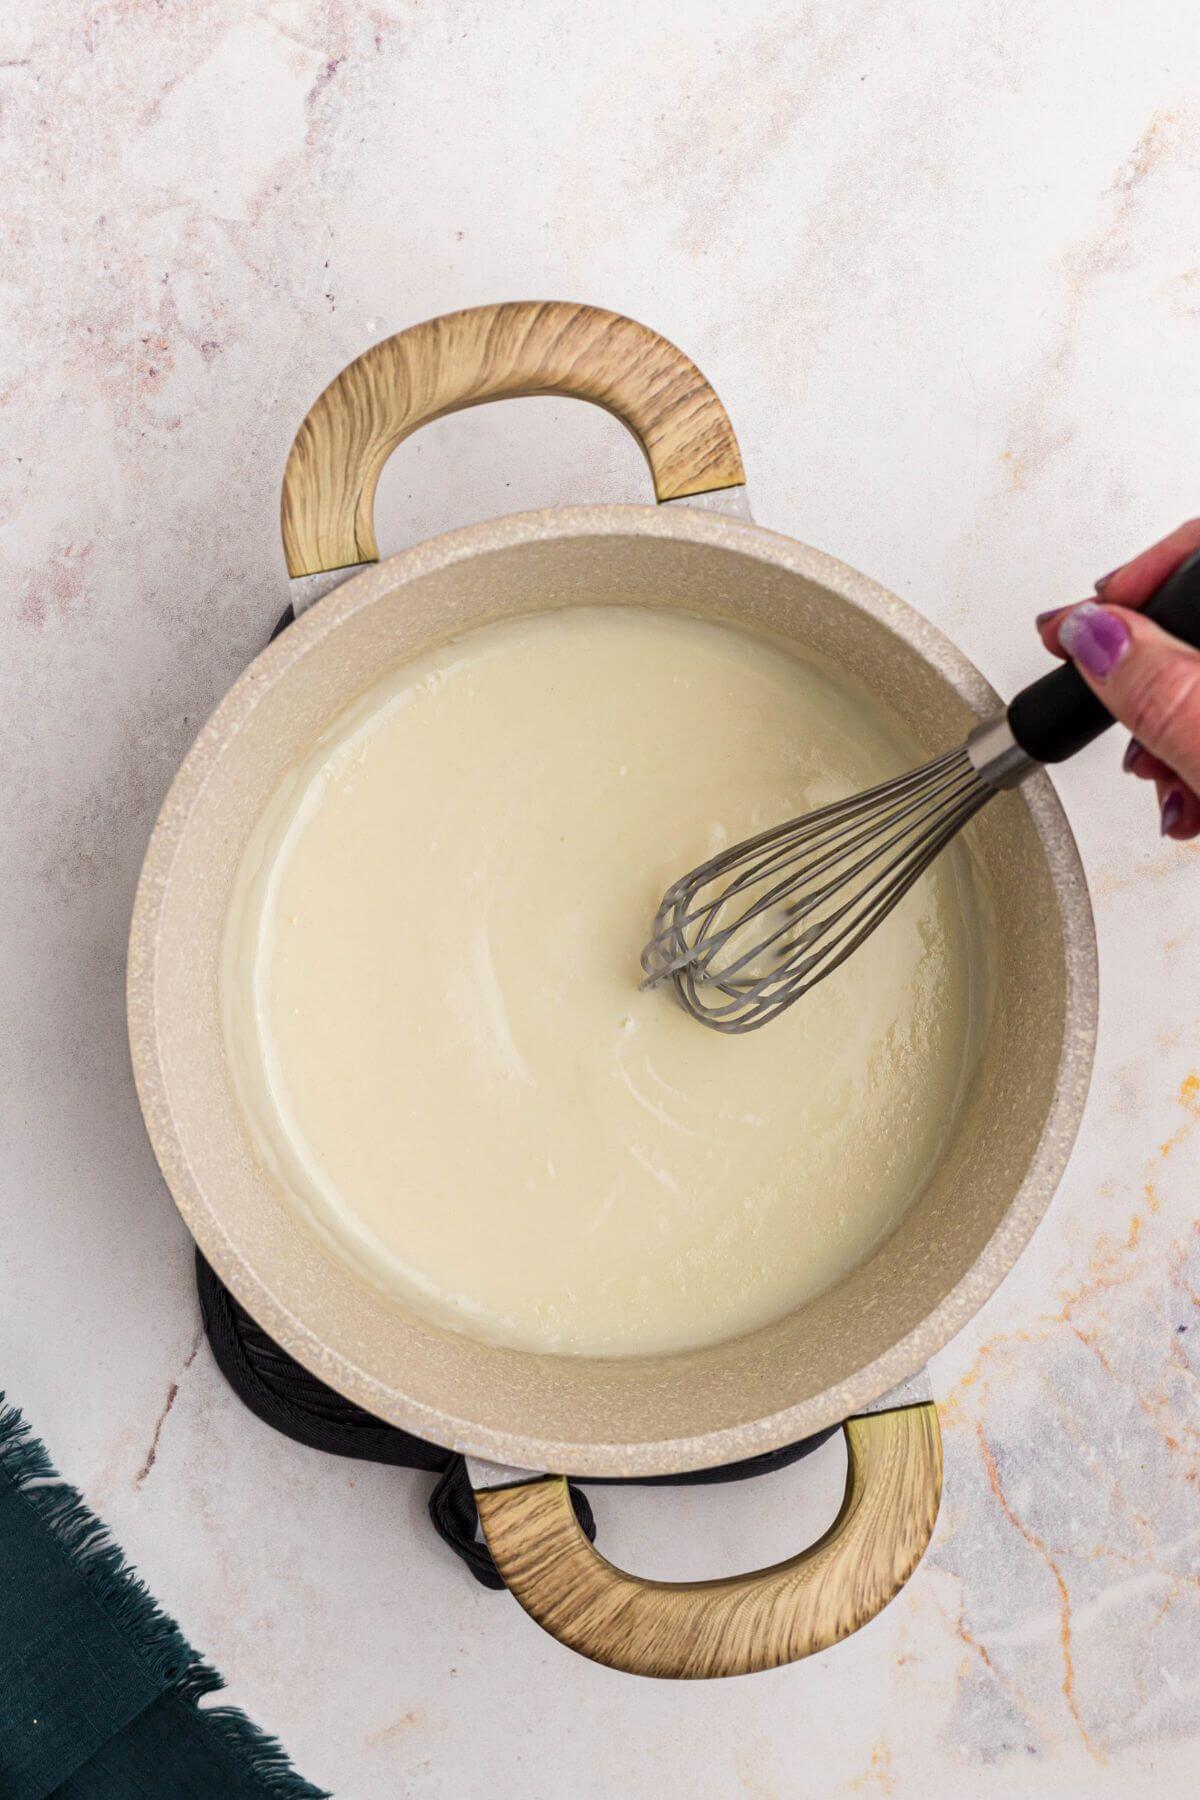 Creamy sauce of butter, flour and milk mixed together in a saucepan. 